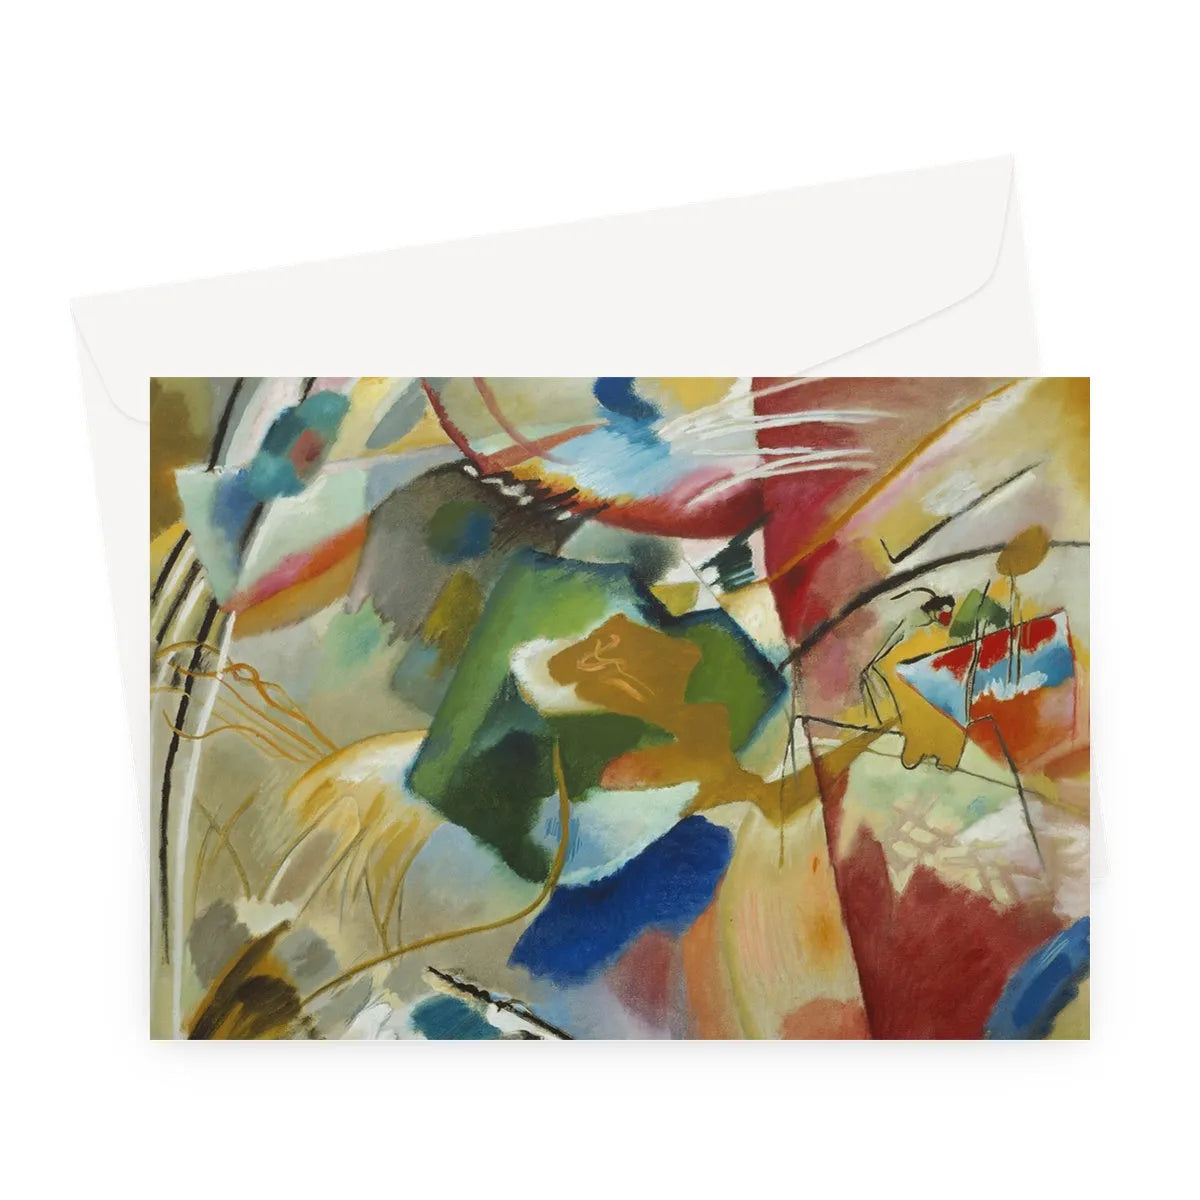 Painting With Green Center By Vasily Kandinsky Greeting Card - A5 Landscape / 1 Card - Greeting & Note Cards